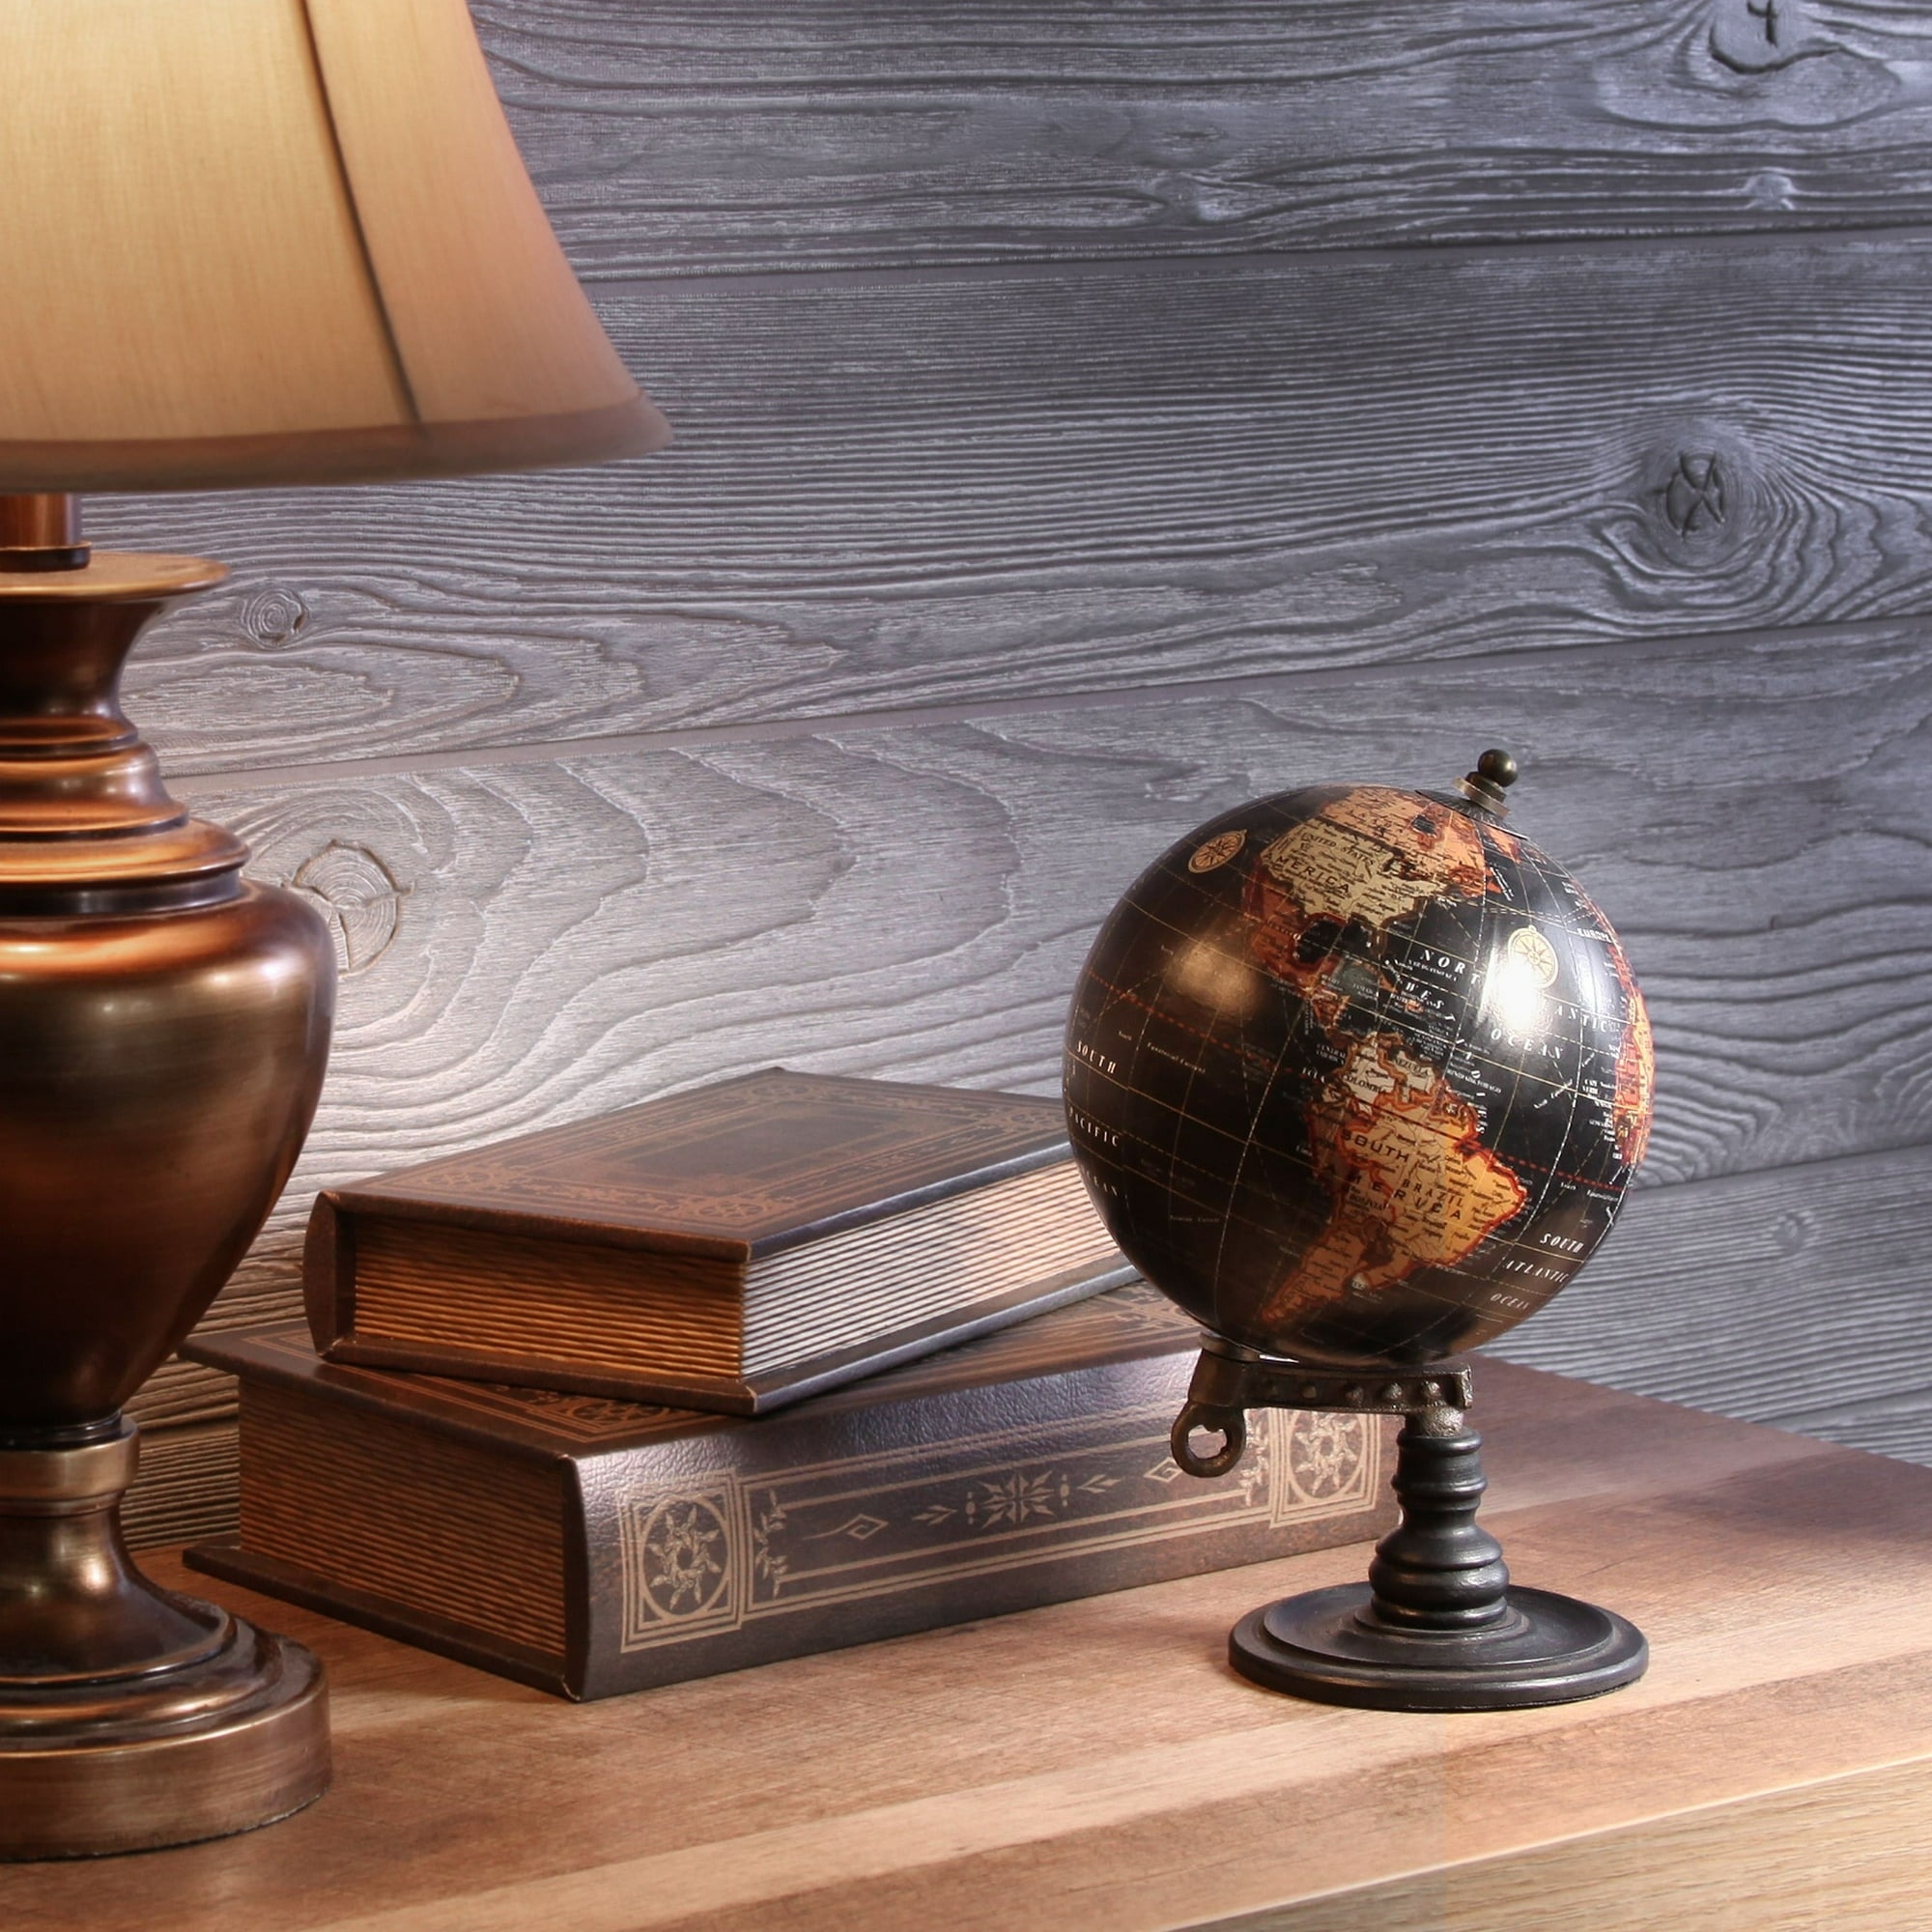 the black geographic globe on top of a table